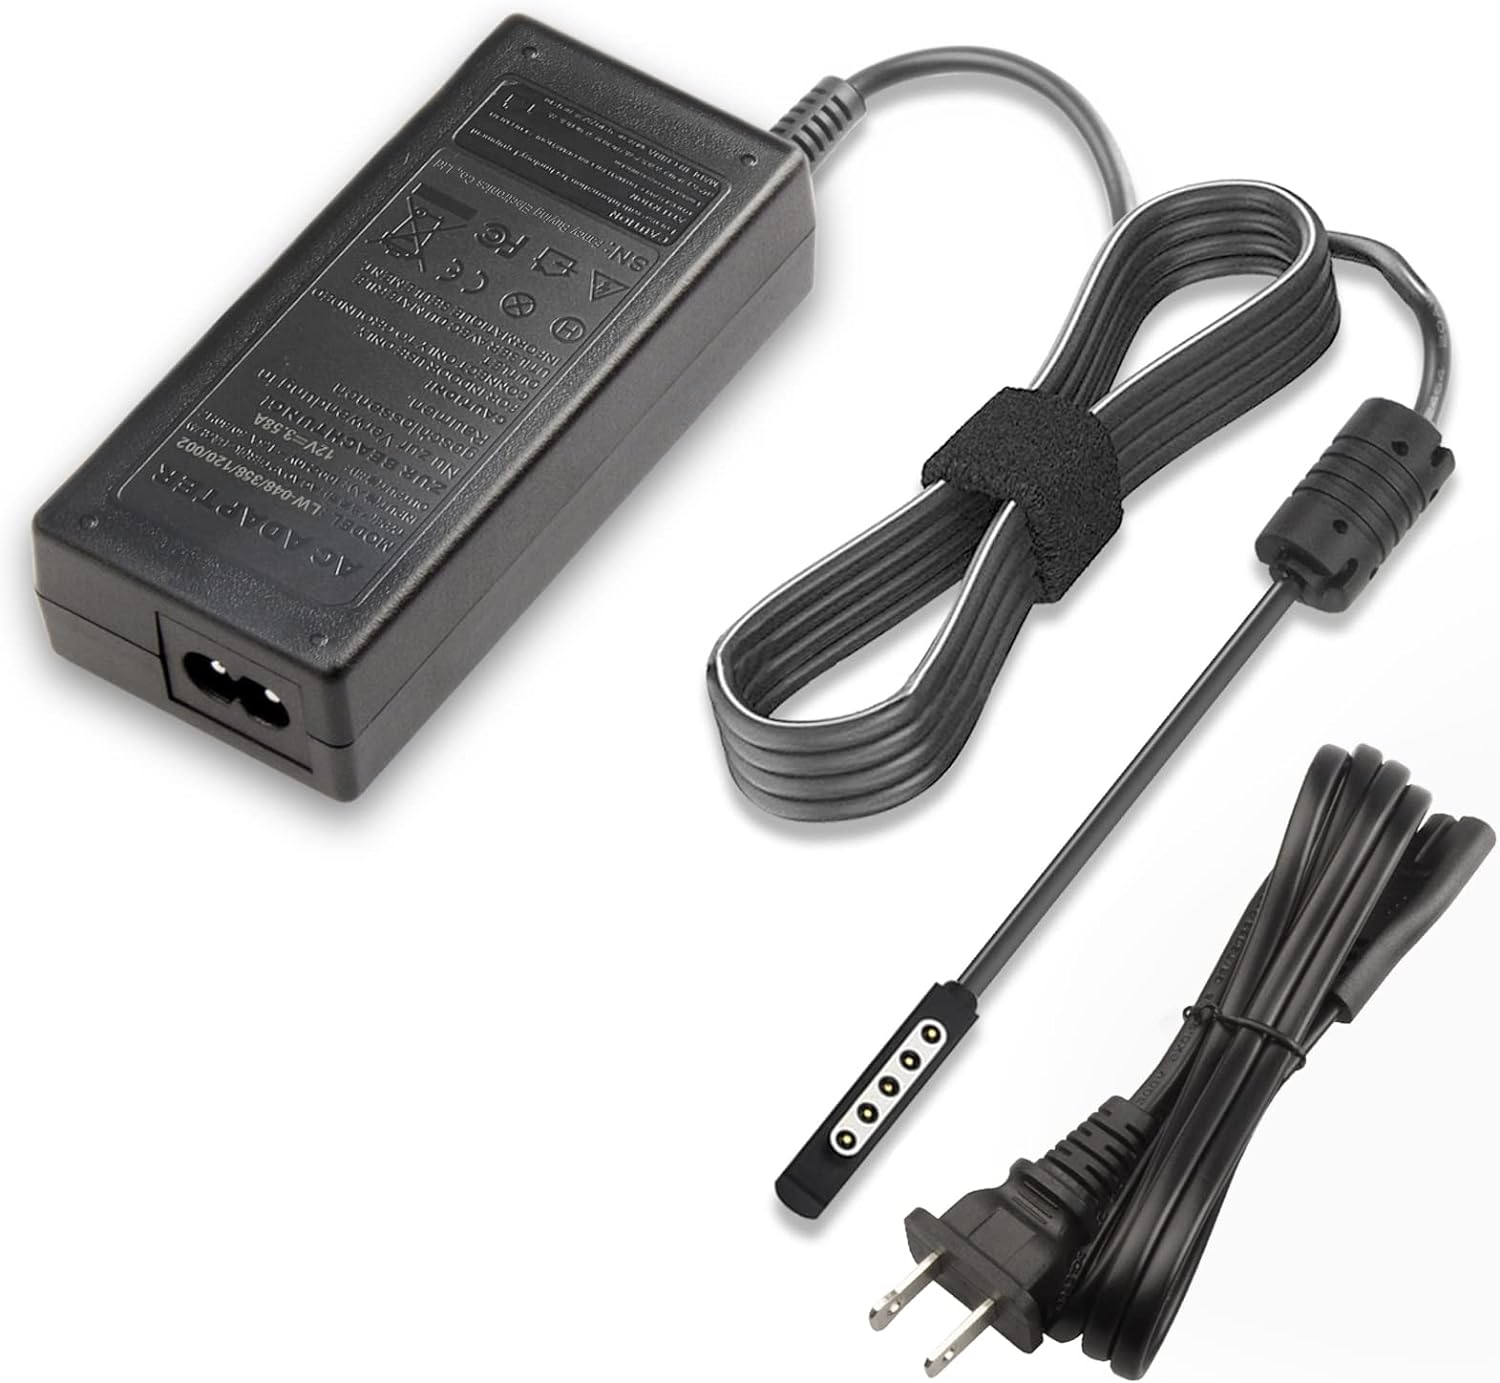 48W 12V 3.58A AC Adapter Charger for Microsoft Surface Pro 2 Surface Pro 1 Surface RT Connectivity Technology Five-pin - Click Image to Close